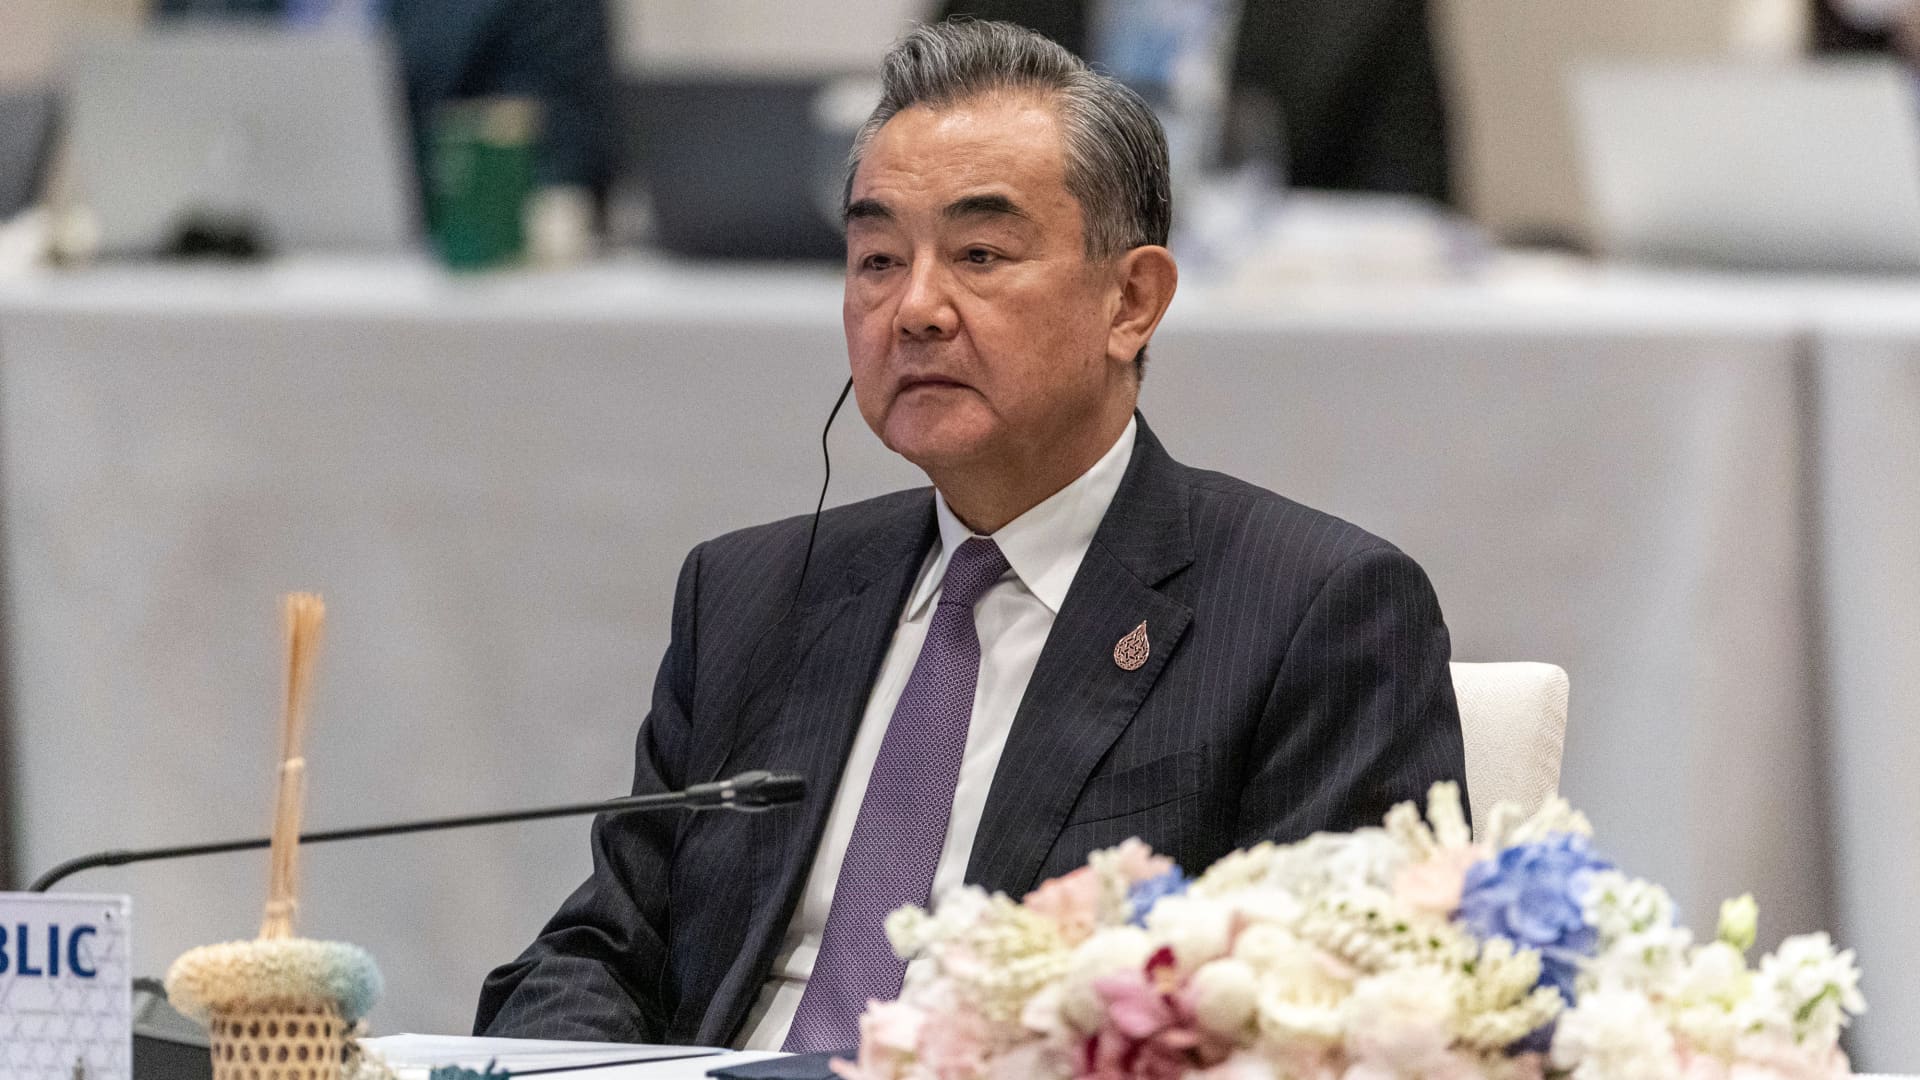 China's top diplomat Wang Yi will visit Russia later this month during a tour of several European countries, the Chinese foreign ministry said on Monday.